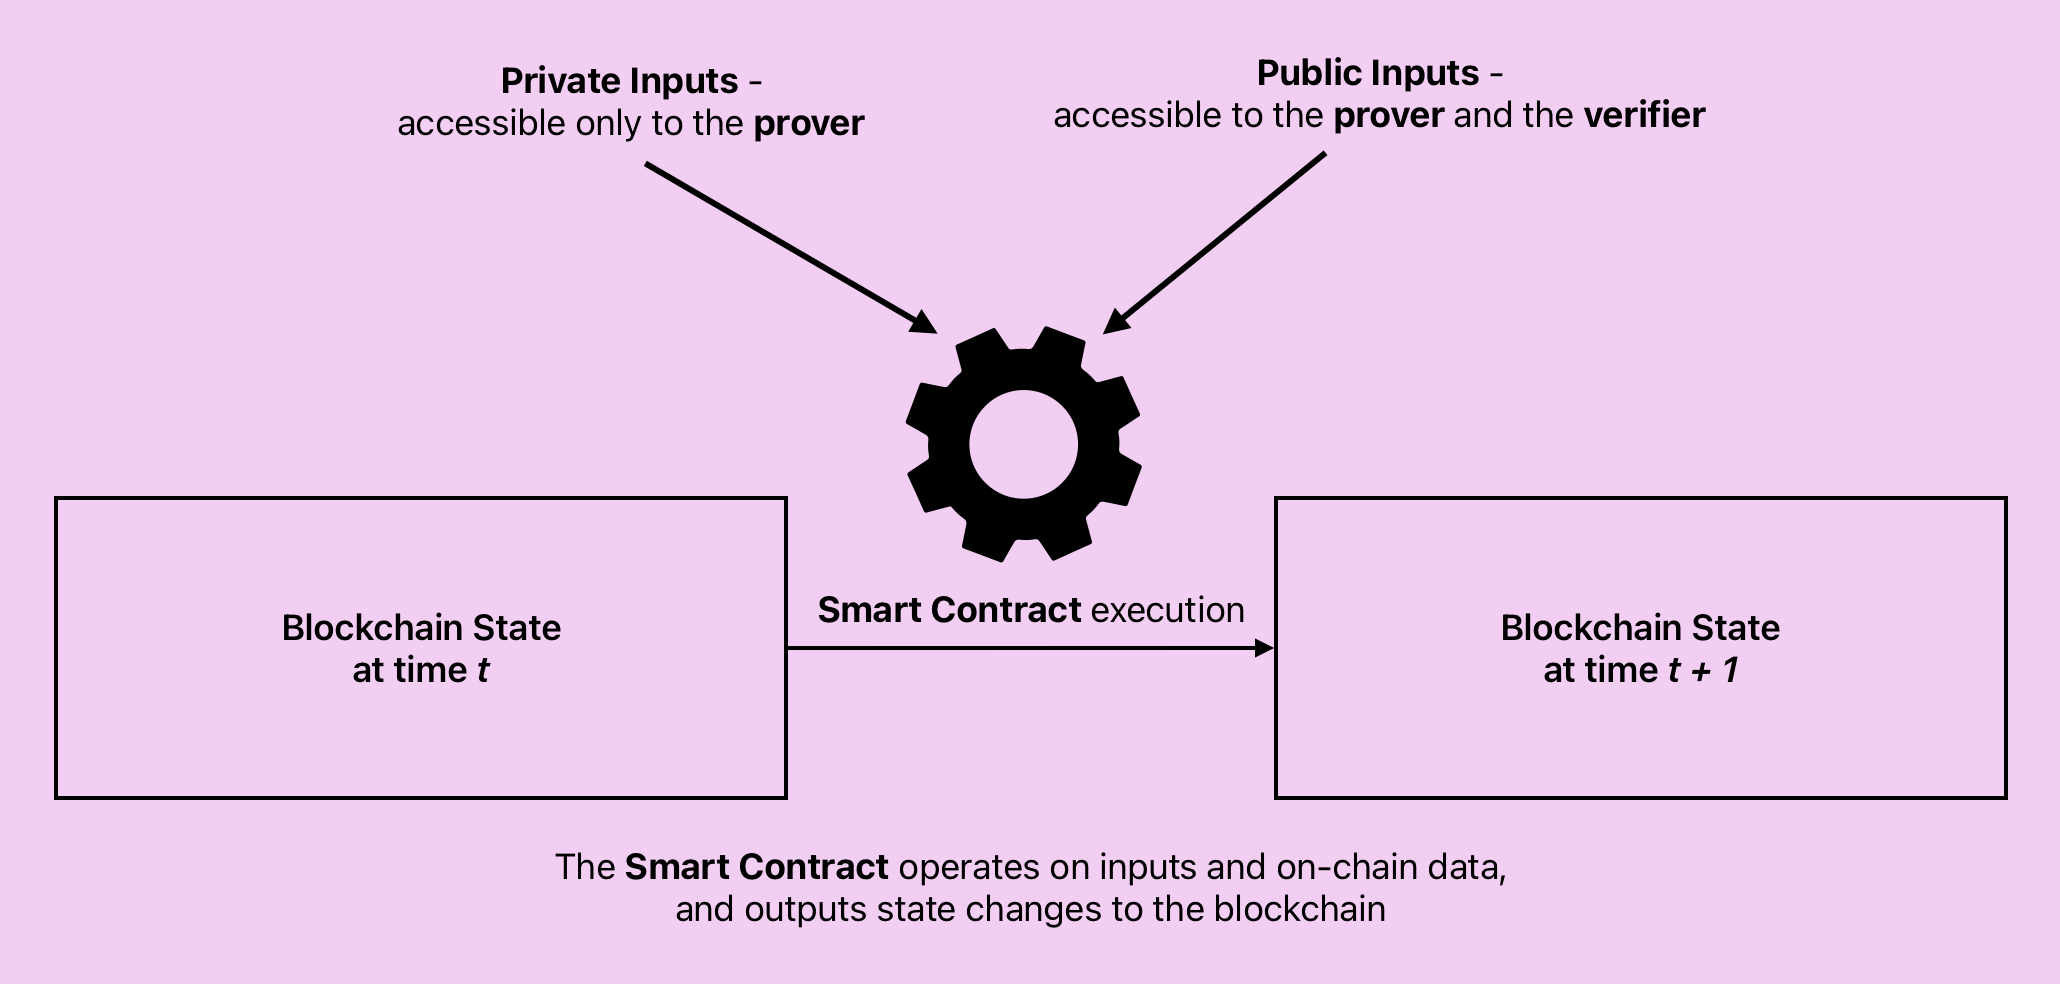 A conceptual diagram showing the flow of data through a smart contract within a blockchain framework. Two boxes labeled 'Blockchain State at time t' and +Blockchain State at time t + 1' represent the state of the blockchain before and after a smart contract execution. The smart contract, depicted as a gear in the center, receives 'Private Inputs' accessible only to the prover and 'Public Inputs' that are accessible to both the prover and verifier. This illustrates the role of the smart contract in operating on inputs and on-chain data to output state changes to the blockchain, encapsulating the concept of private and public data interaction in Zero-Knowledge proofs and the immutable nature of blockchain transactions.